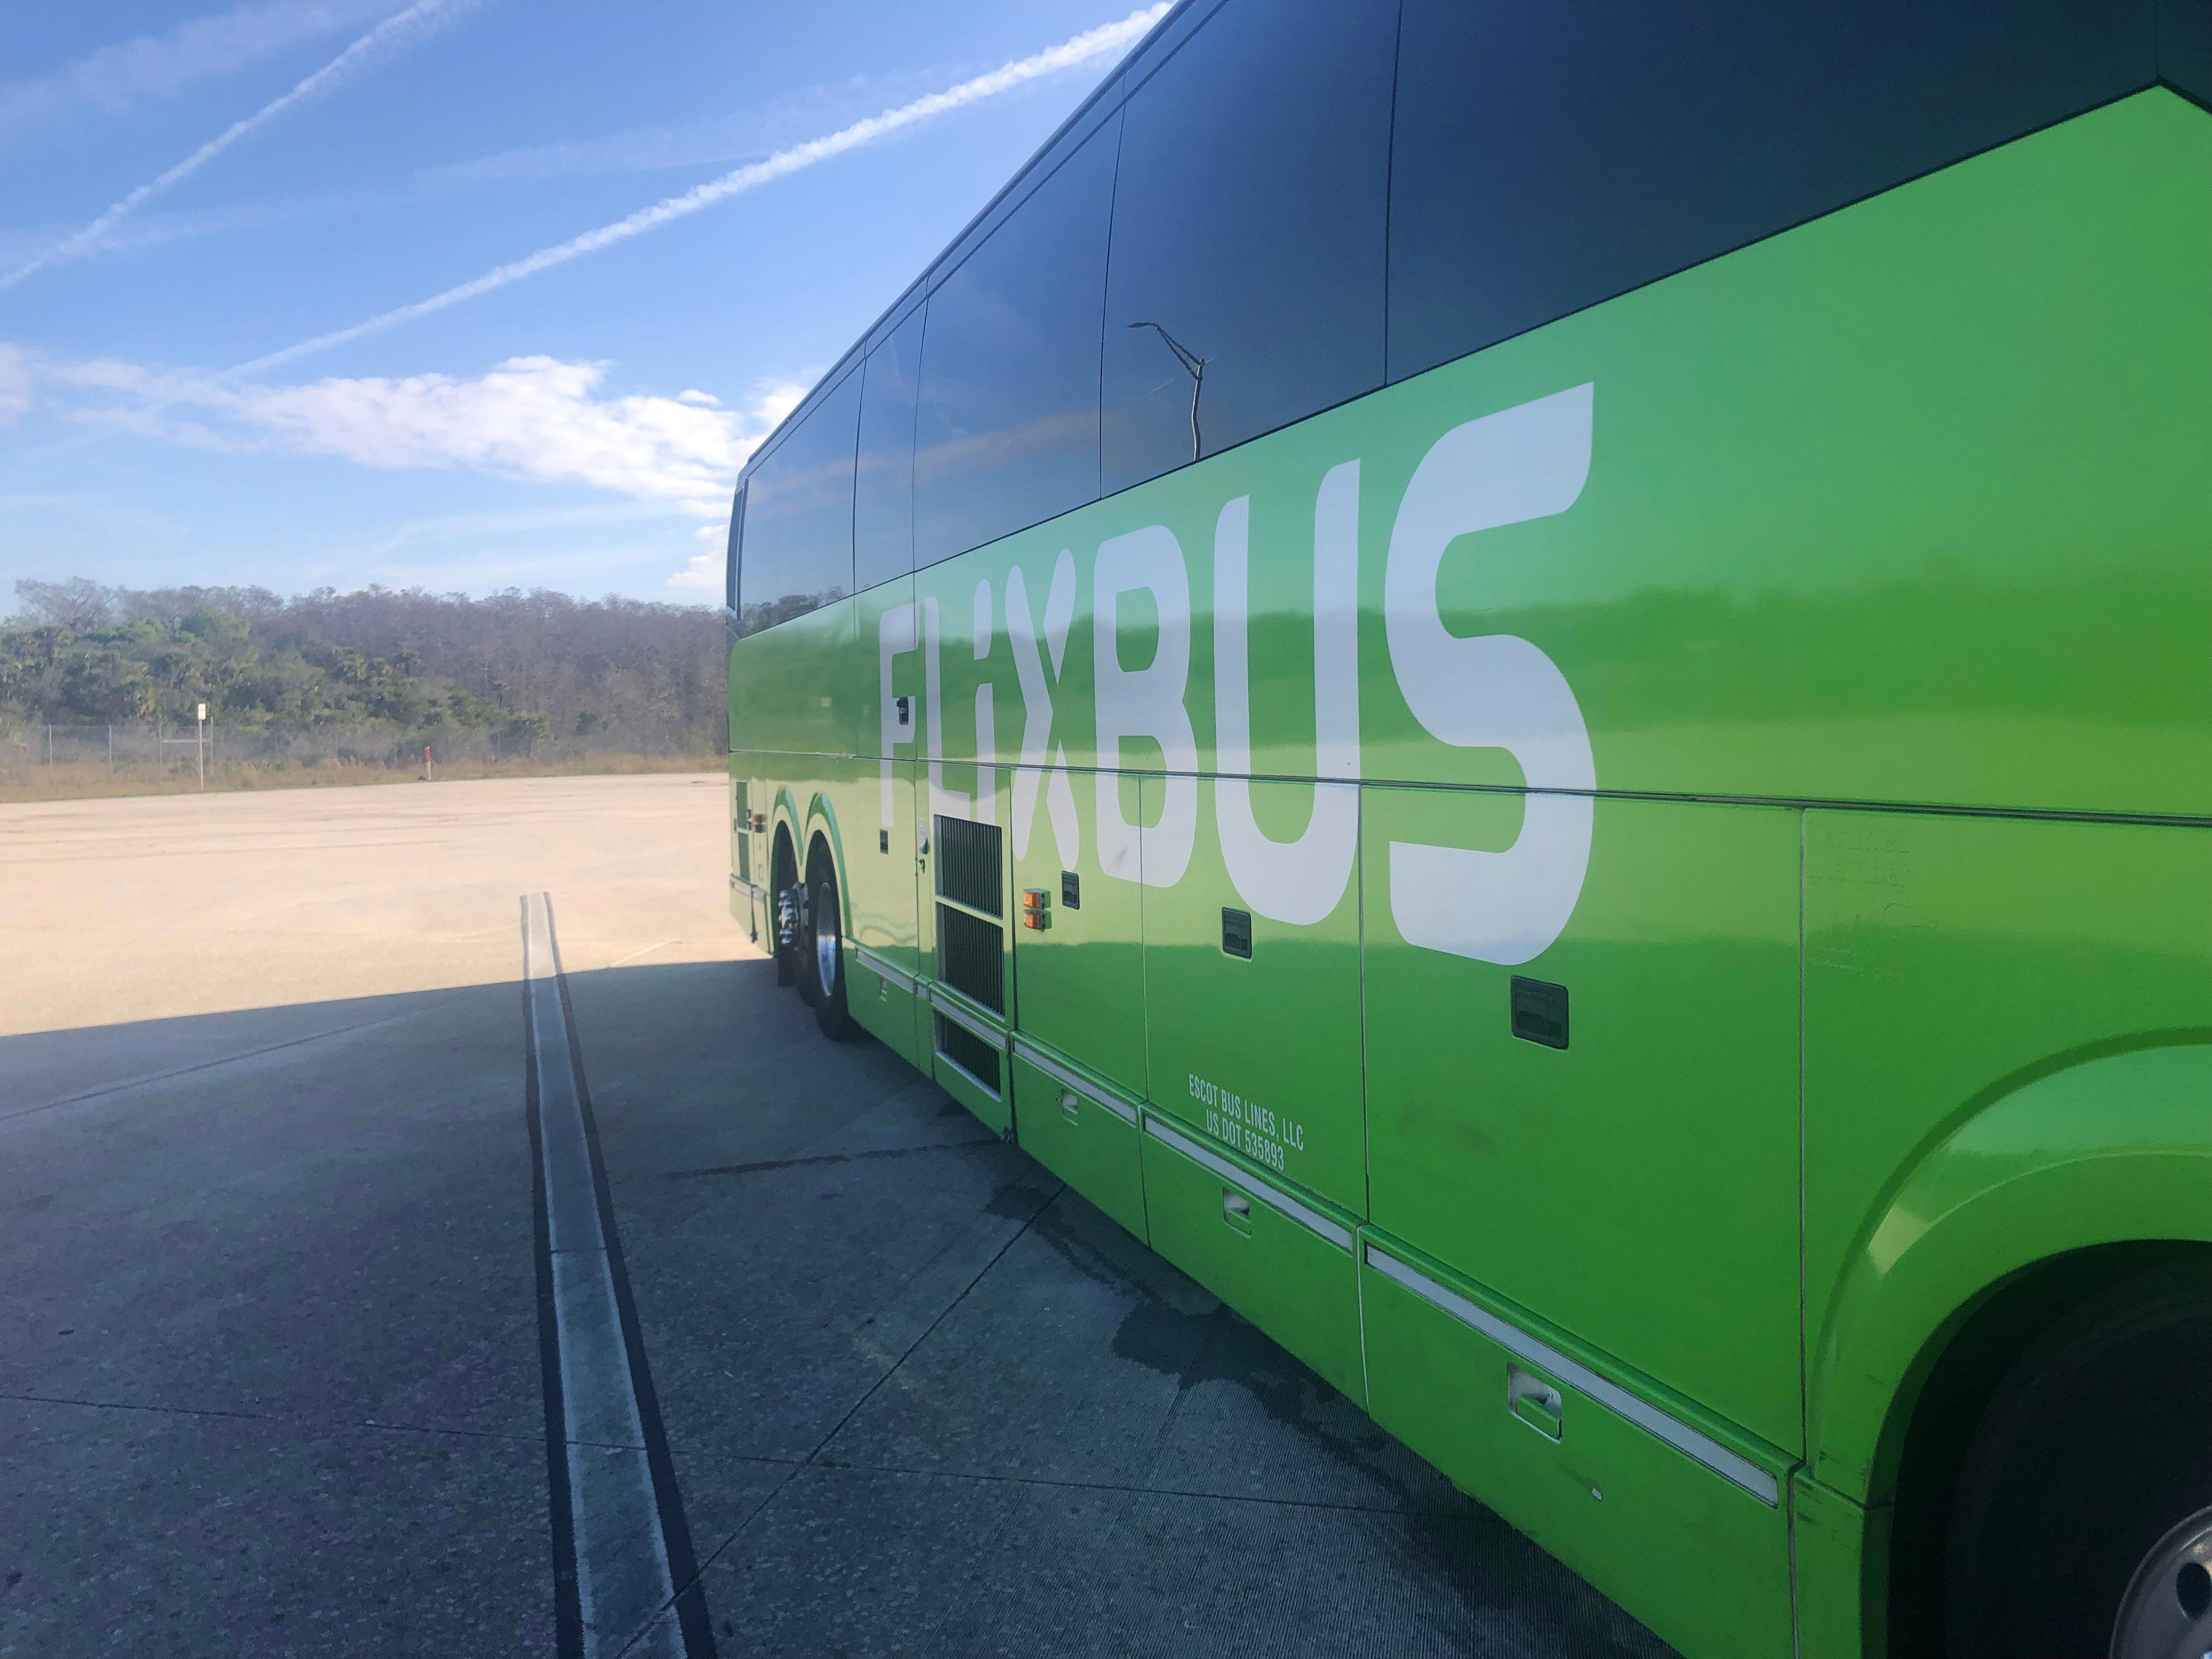 <p>FlixBuses are bright green, so I was able to see it as soon as it pulled into the station. </p><p>My bus was right on time, and I was able to track its arrival from the FlixBus app.</p>